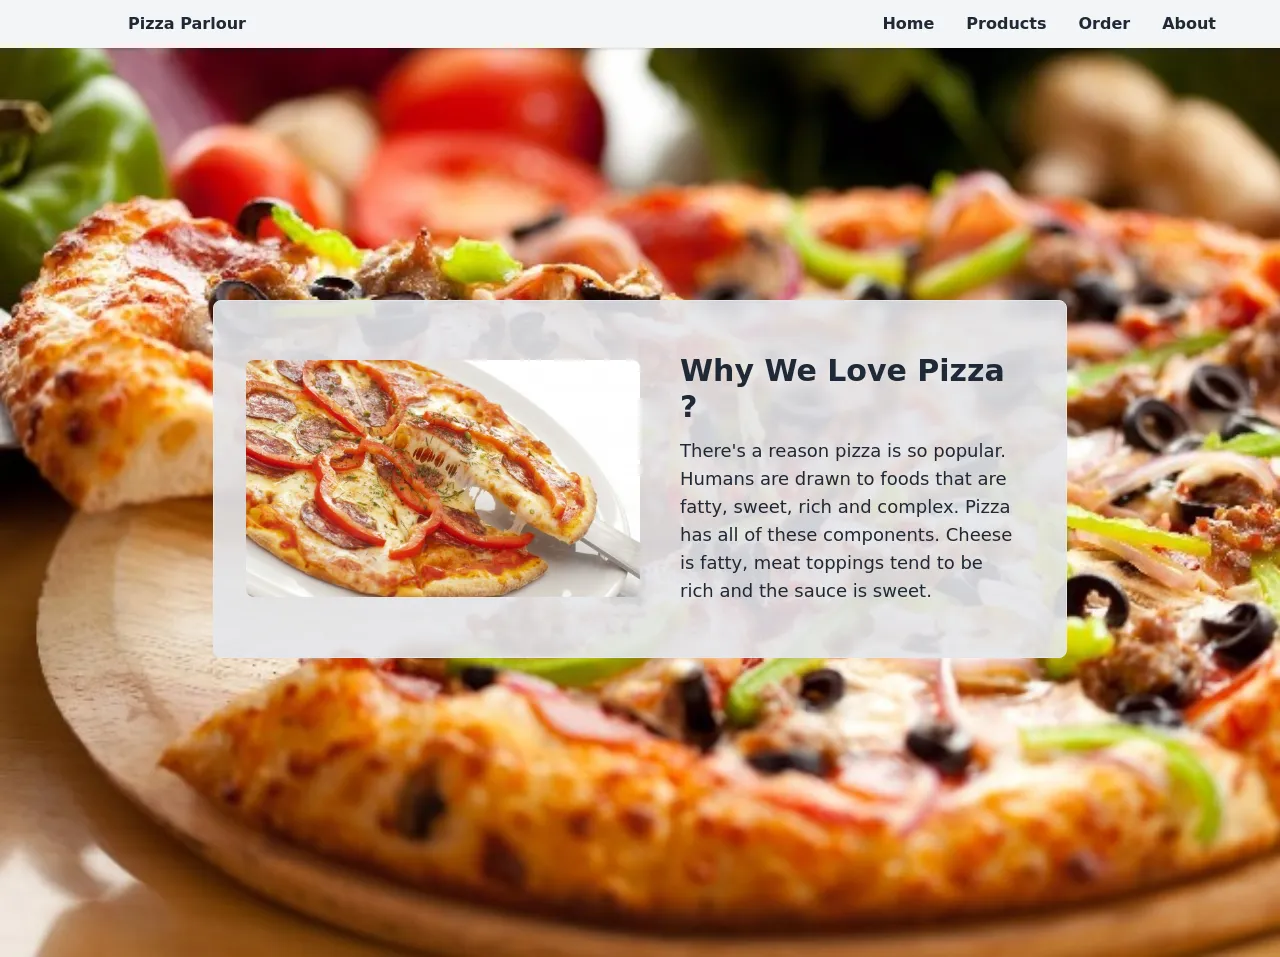 Responsive Layout With Pizza Parlour Example Site